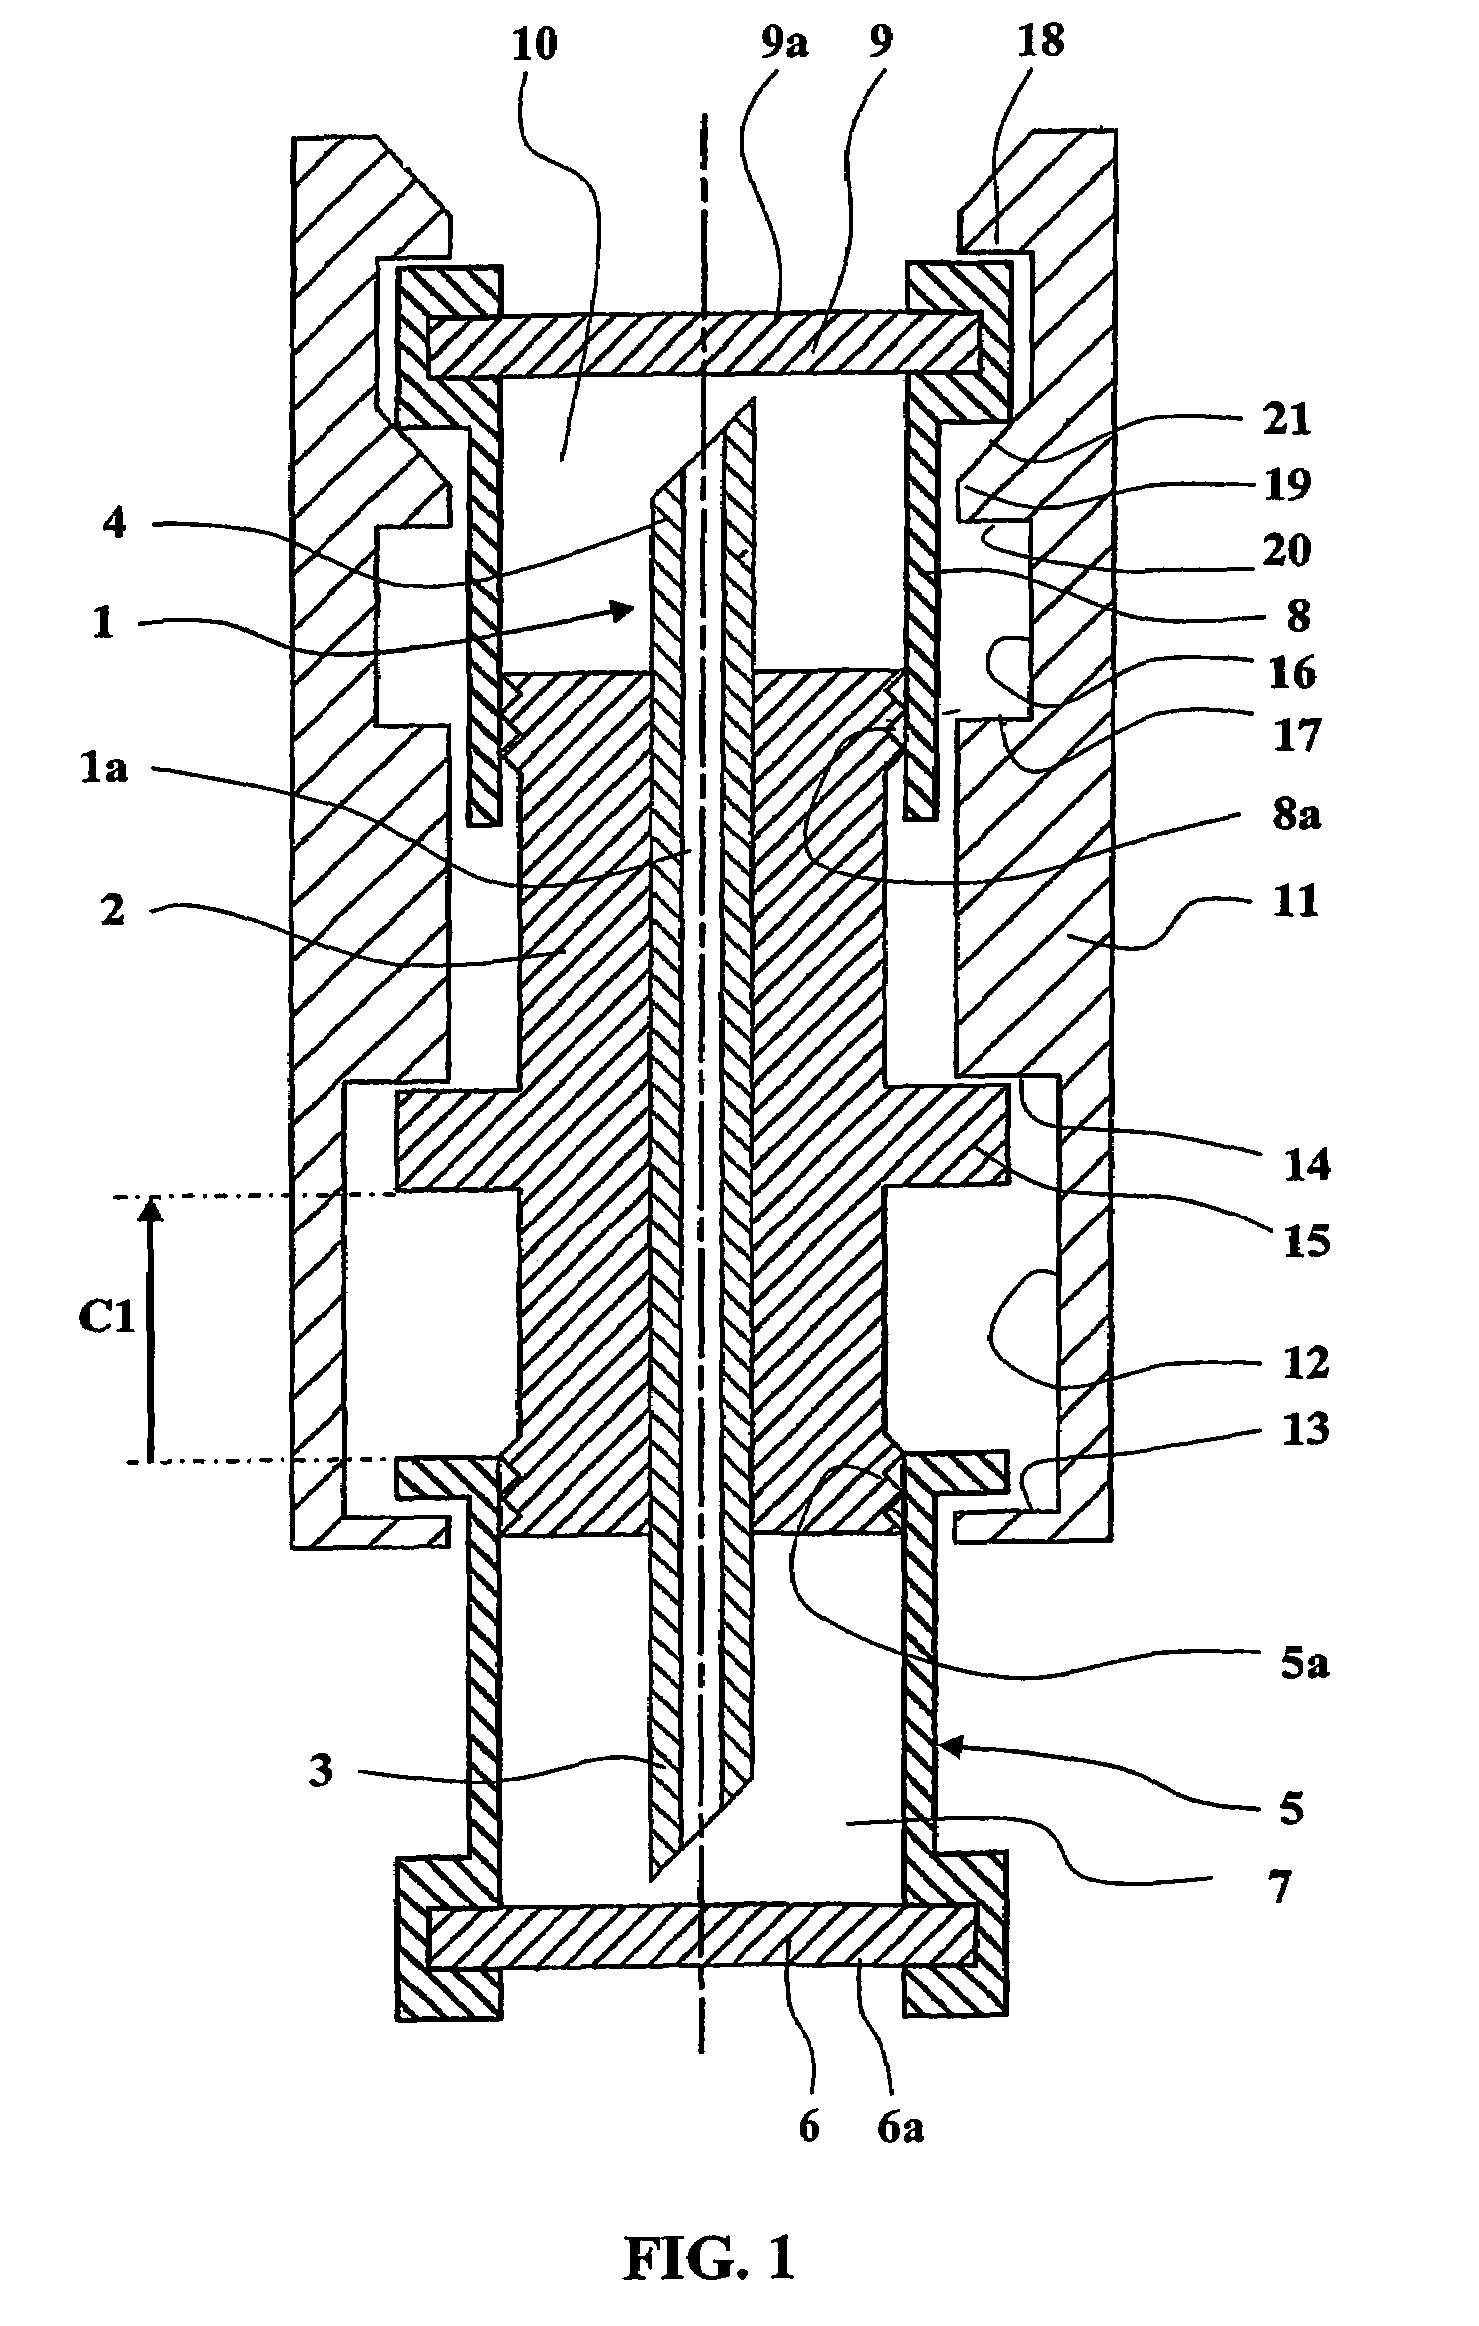 Perforating connector with sterile connection